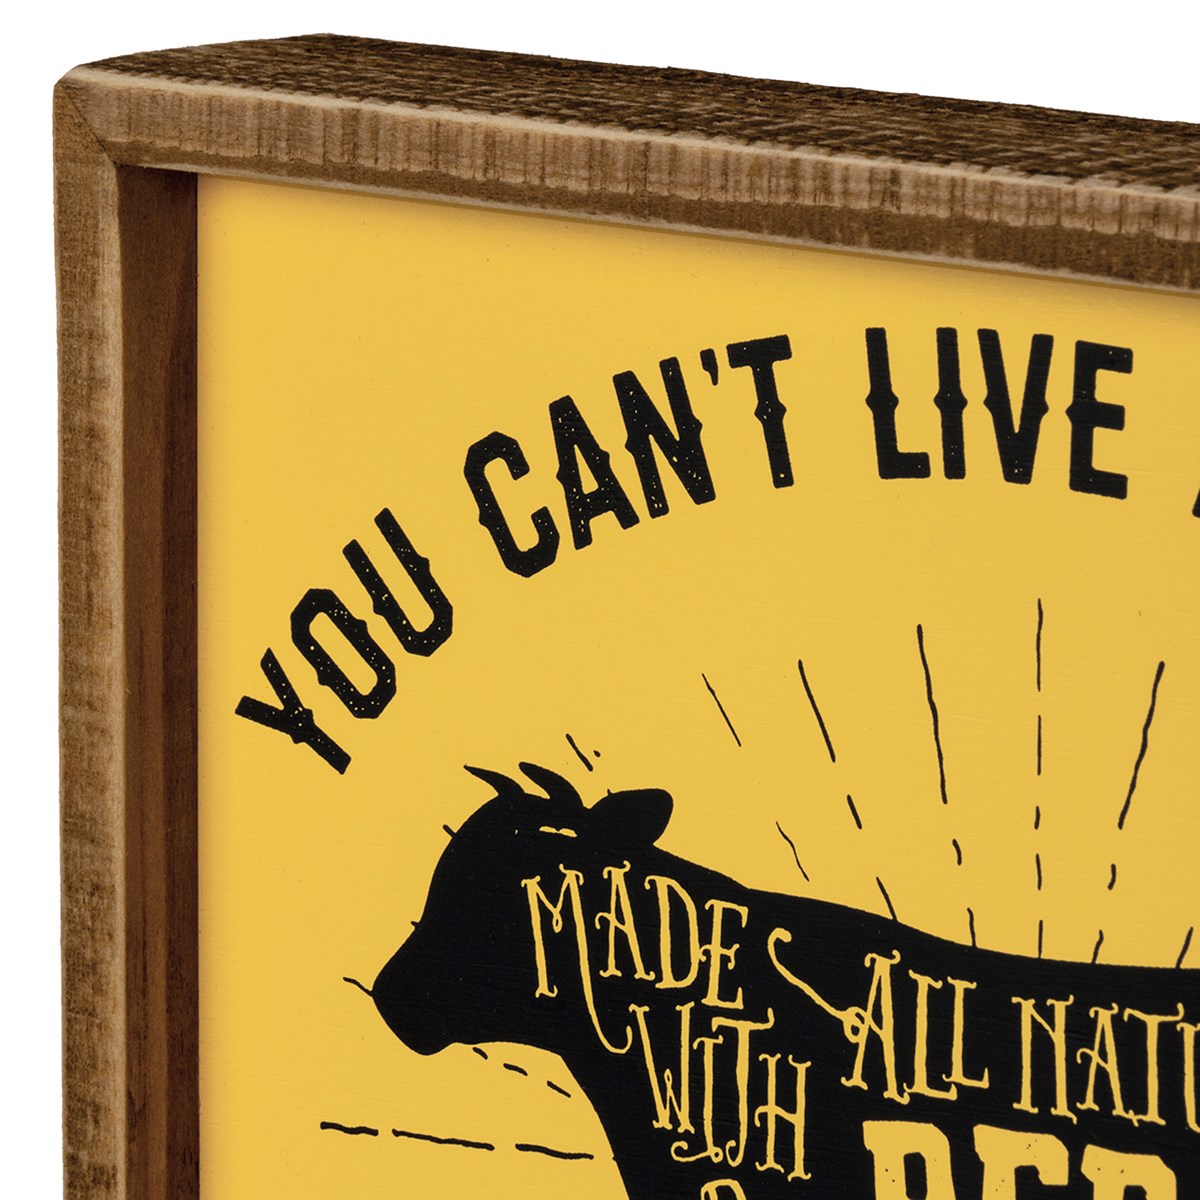 Inset Box Sign - You Can't Live A Full Life - 9" x 8.50" x 1.75" - Wood